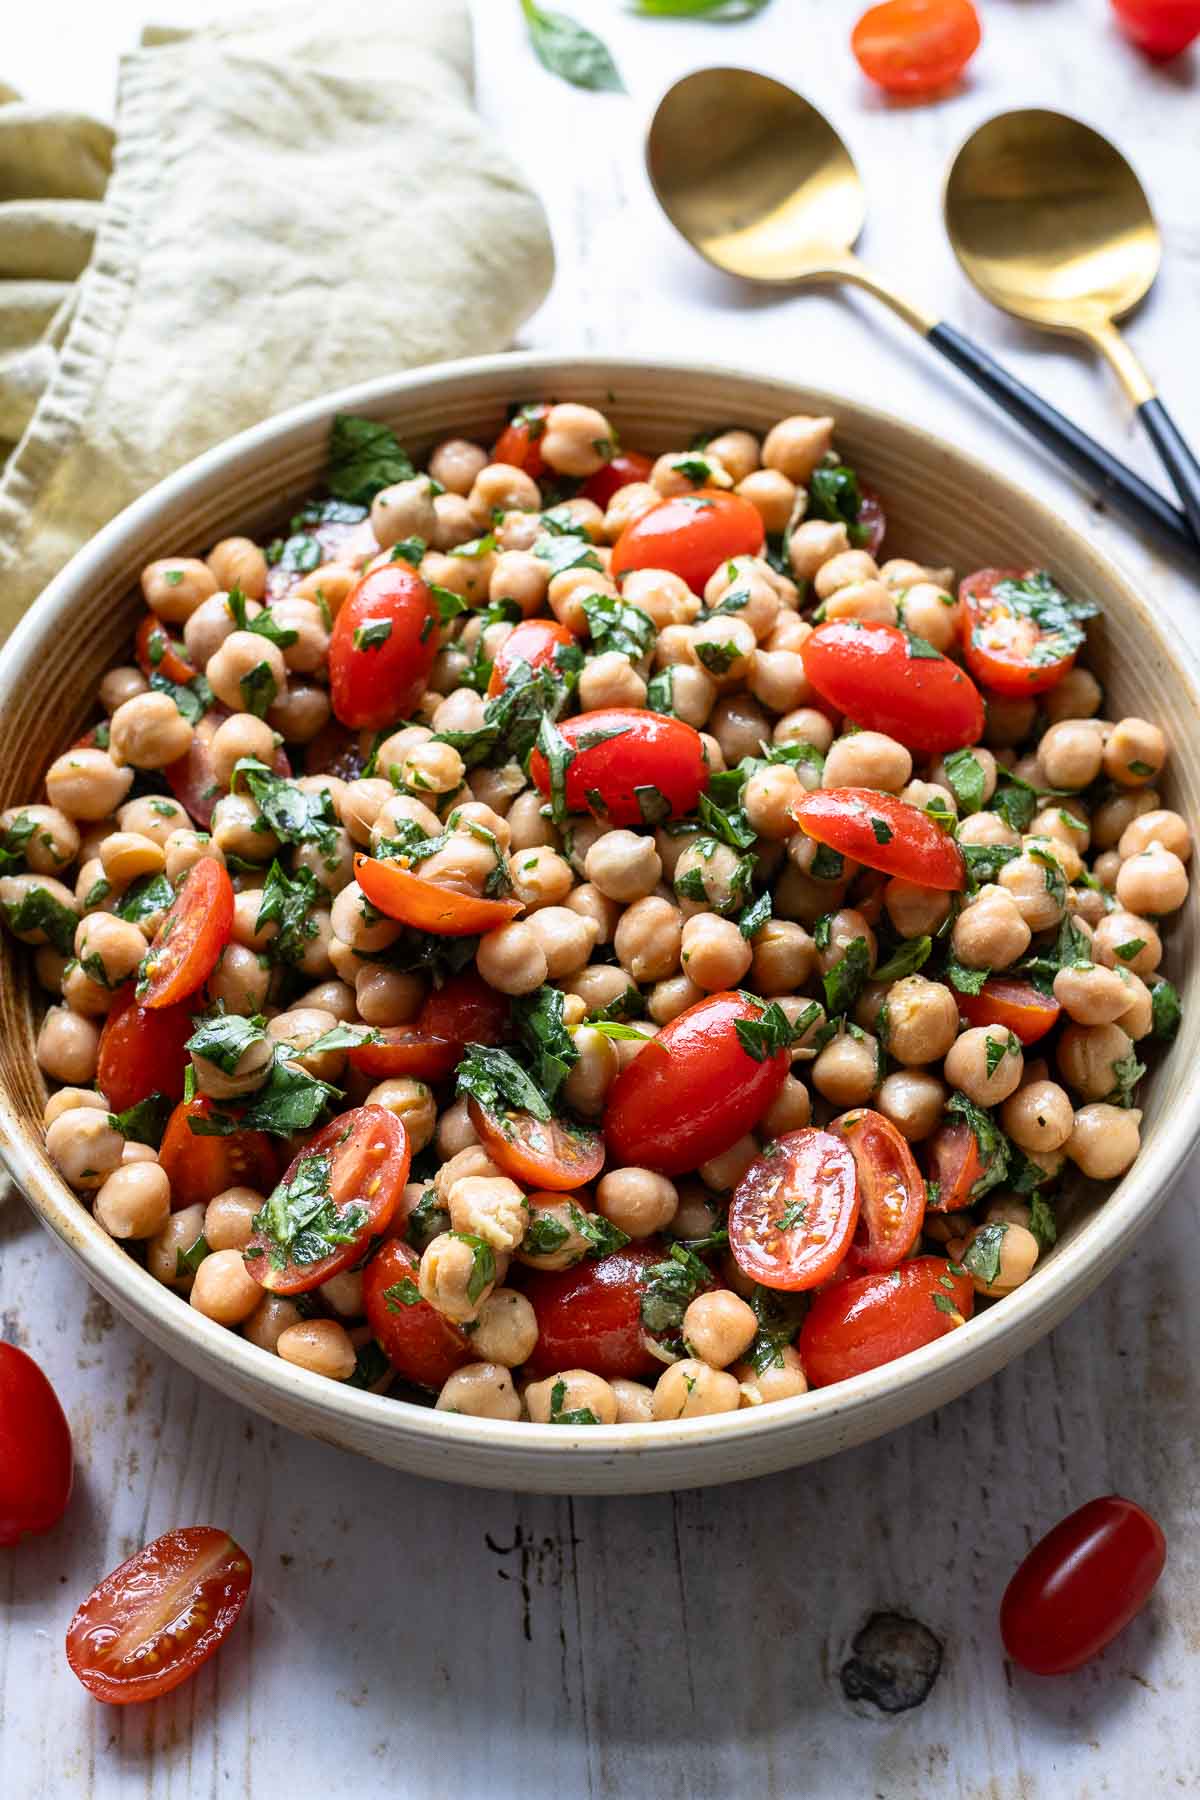 Easy Chickpea Salad with Tomatoes, Herbs and Ginger Vinaigrette